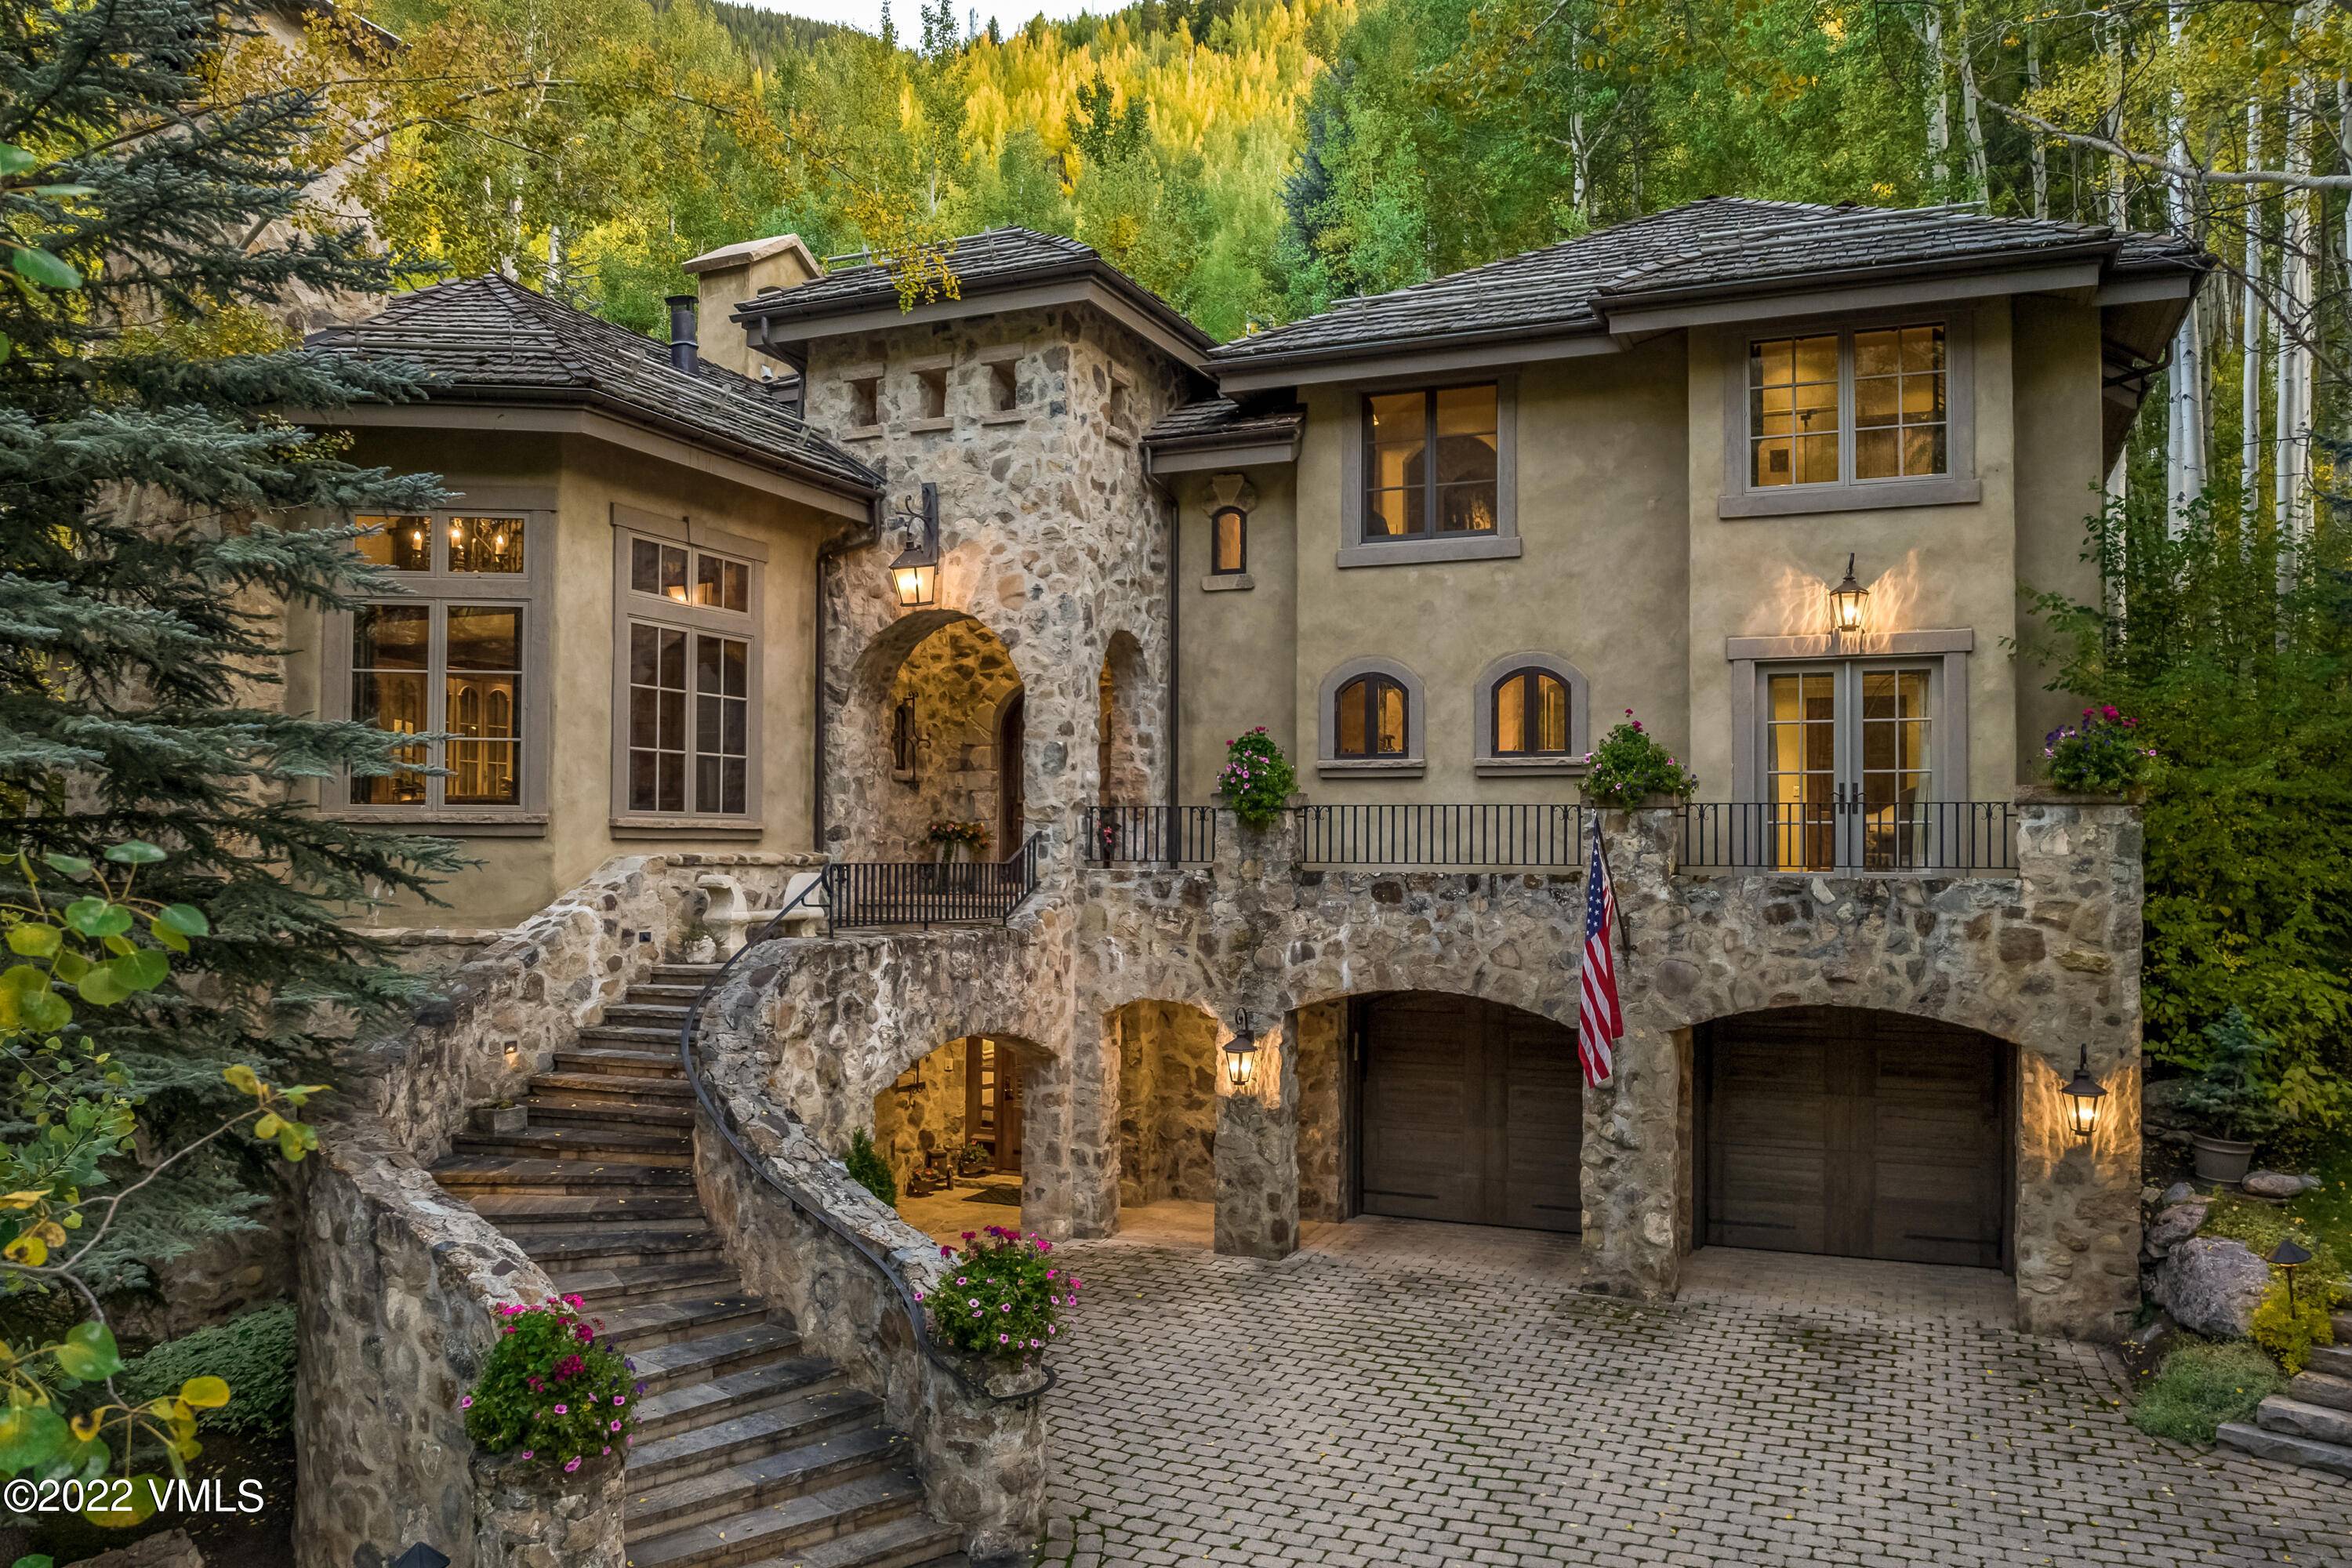 Situated on a tranquil cul de sac within a mature stand of towering aspen, this exquisite home borders the White River National Forest while offering convenience to Vail Golf Course ...